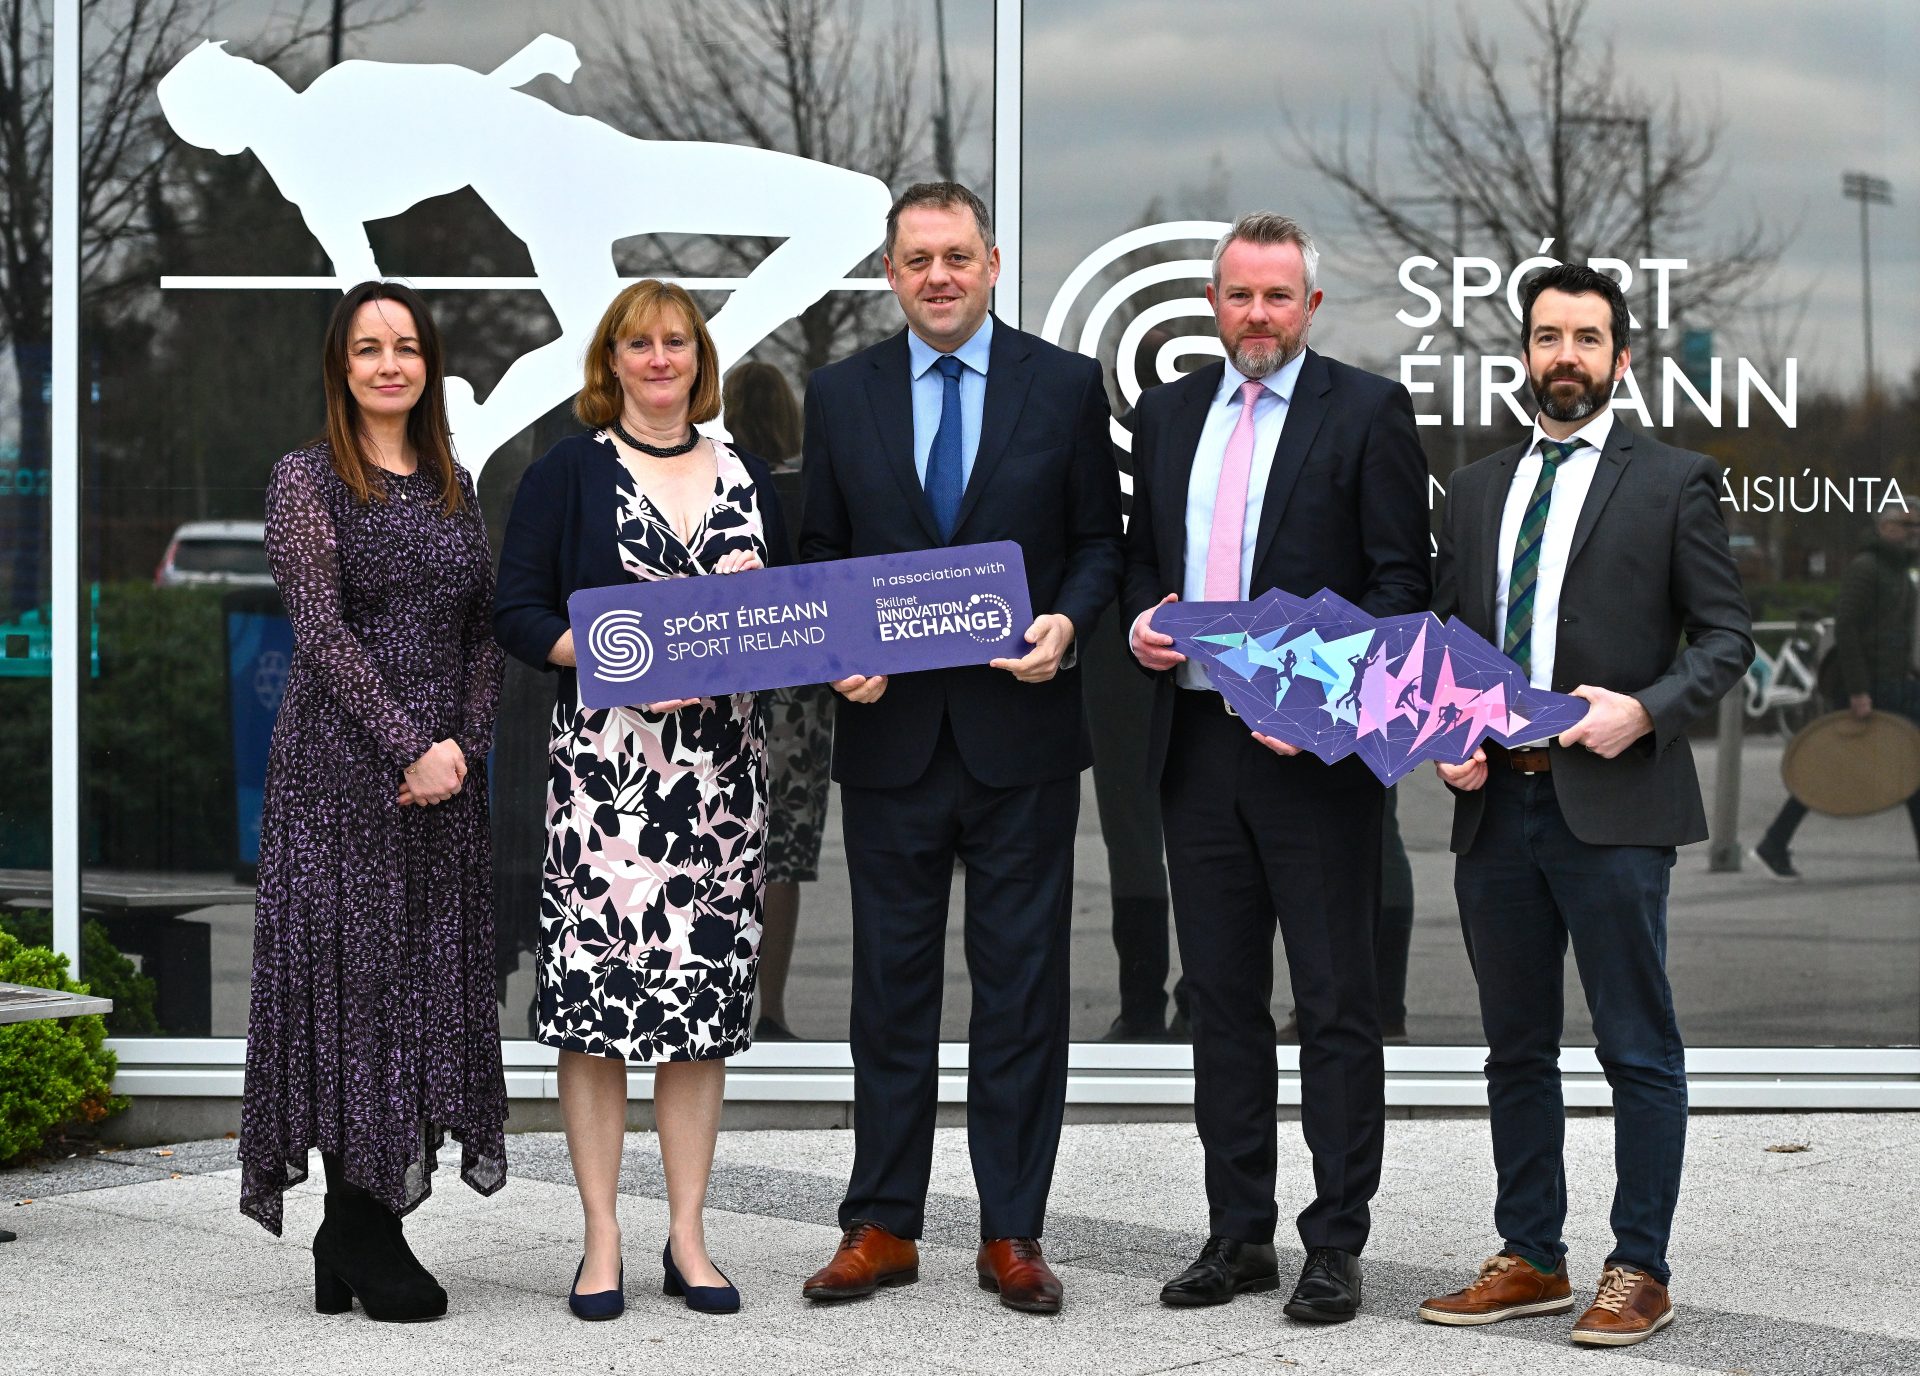 Collaboration between Skillnet Innovation Exchange and Sport Ireland supports the digital transformation of sport in Ireland